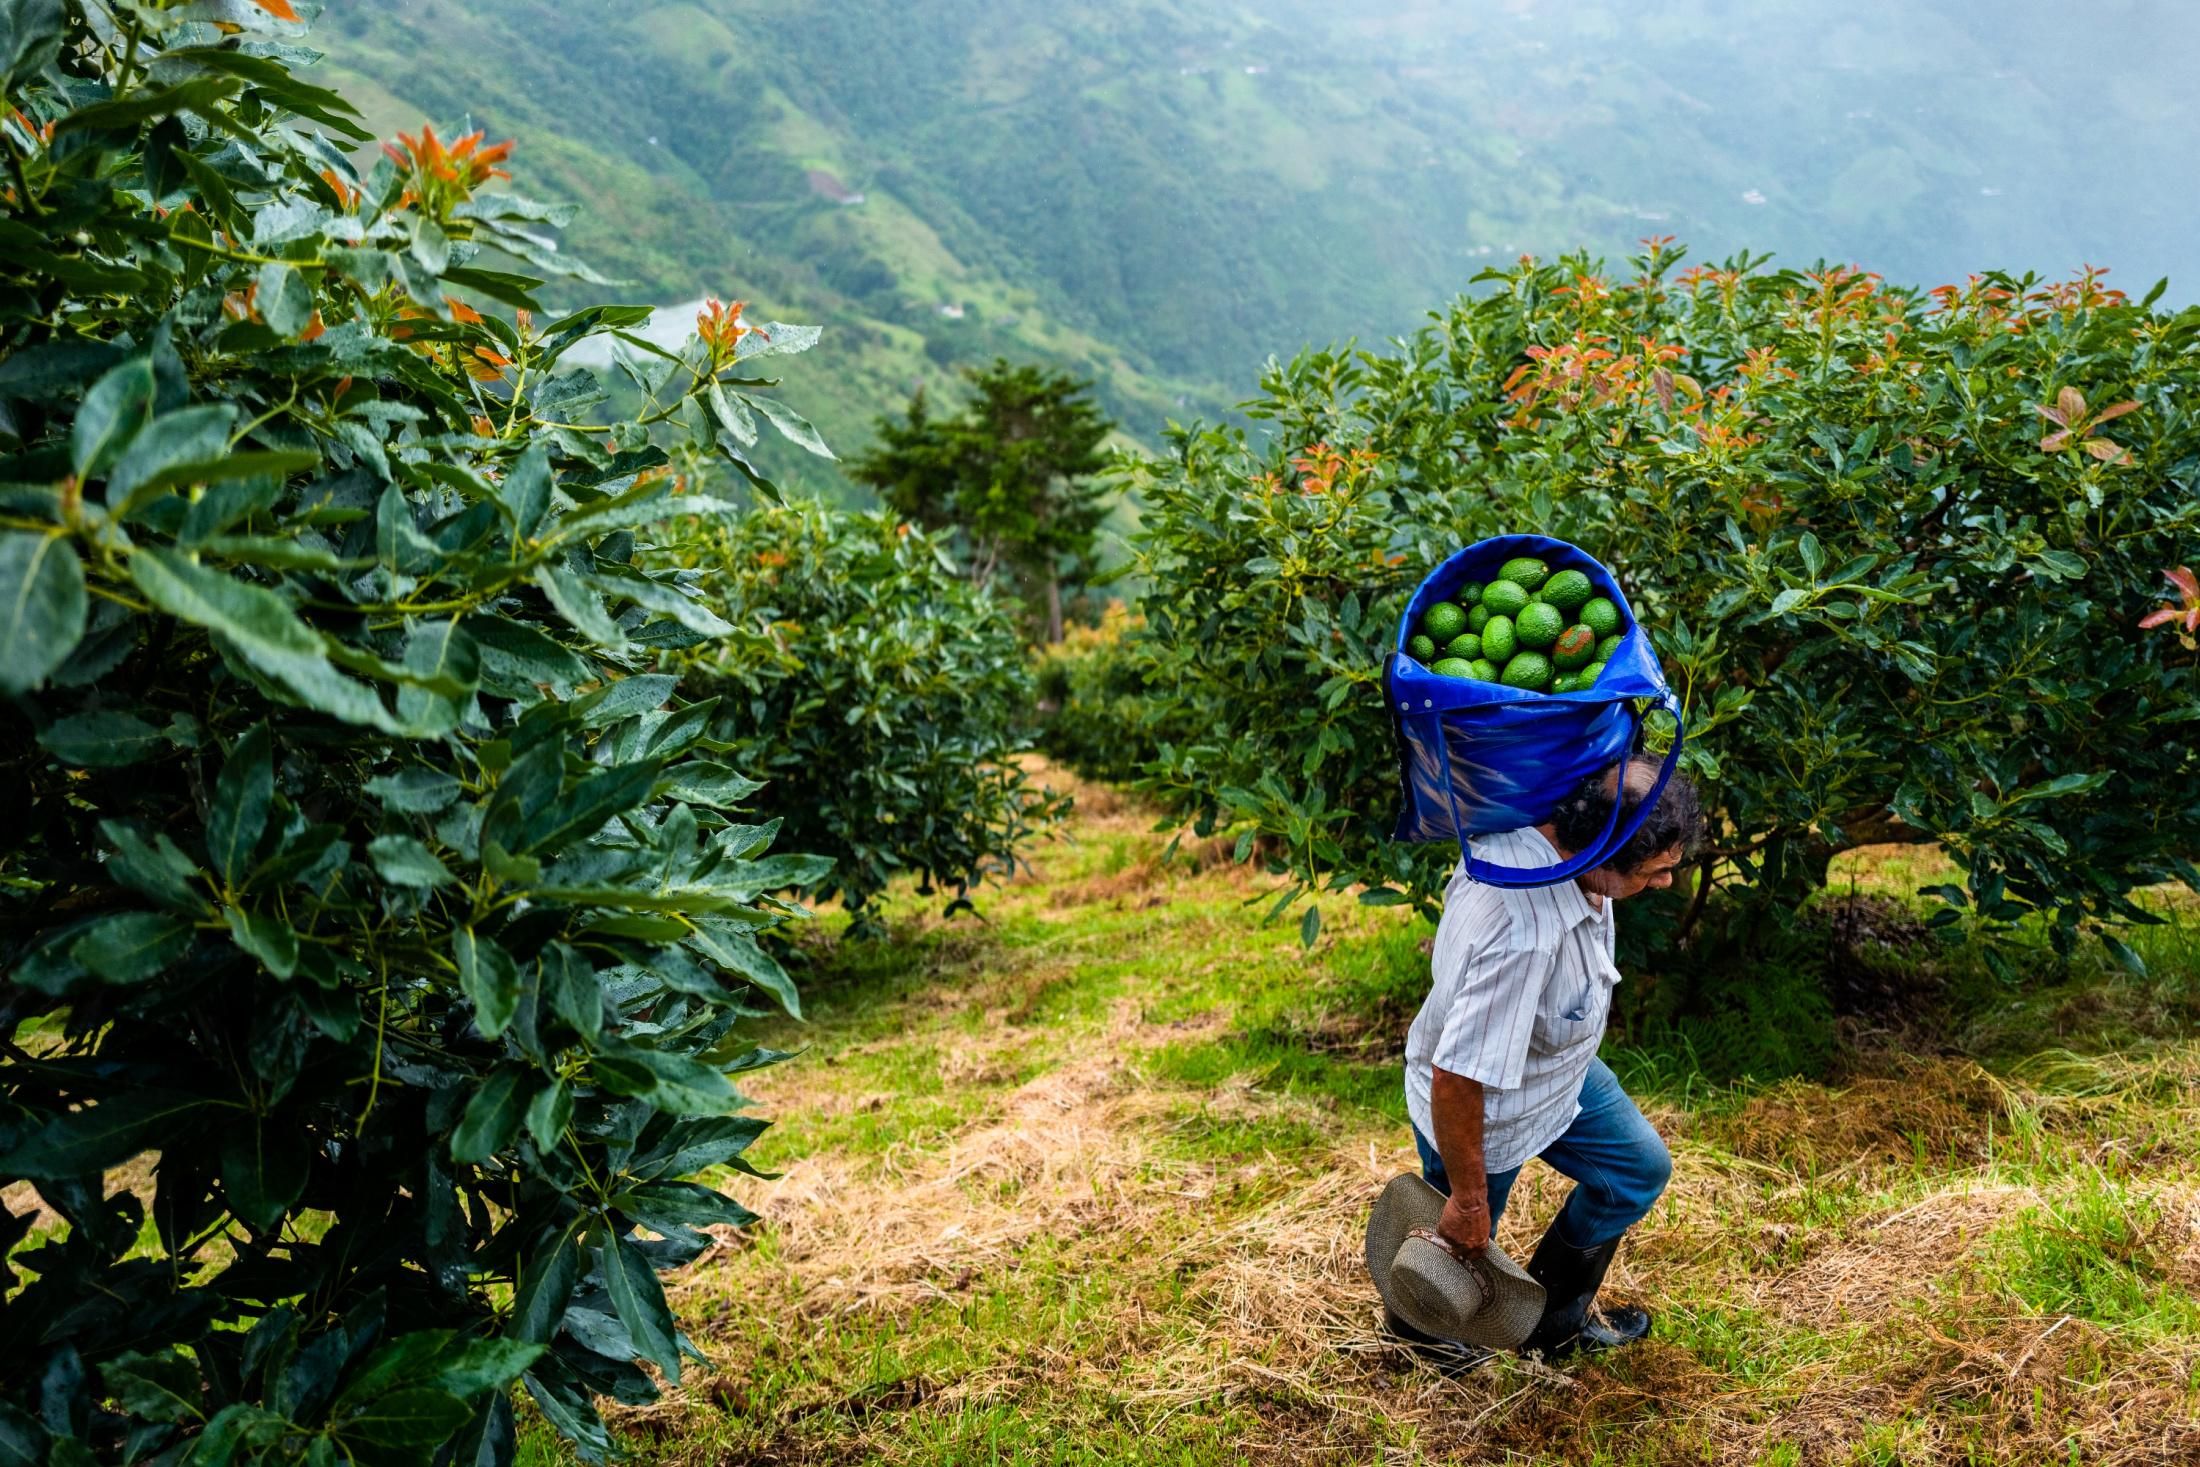 A Colombian farmworker carries a bag of avocados after a harvest on November 21, 2019 near Medellín, Colombia. (Photo: Jan Sochor via Getty Images)